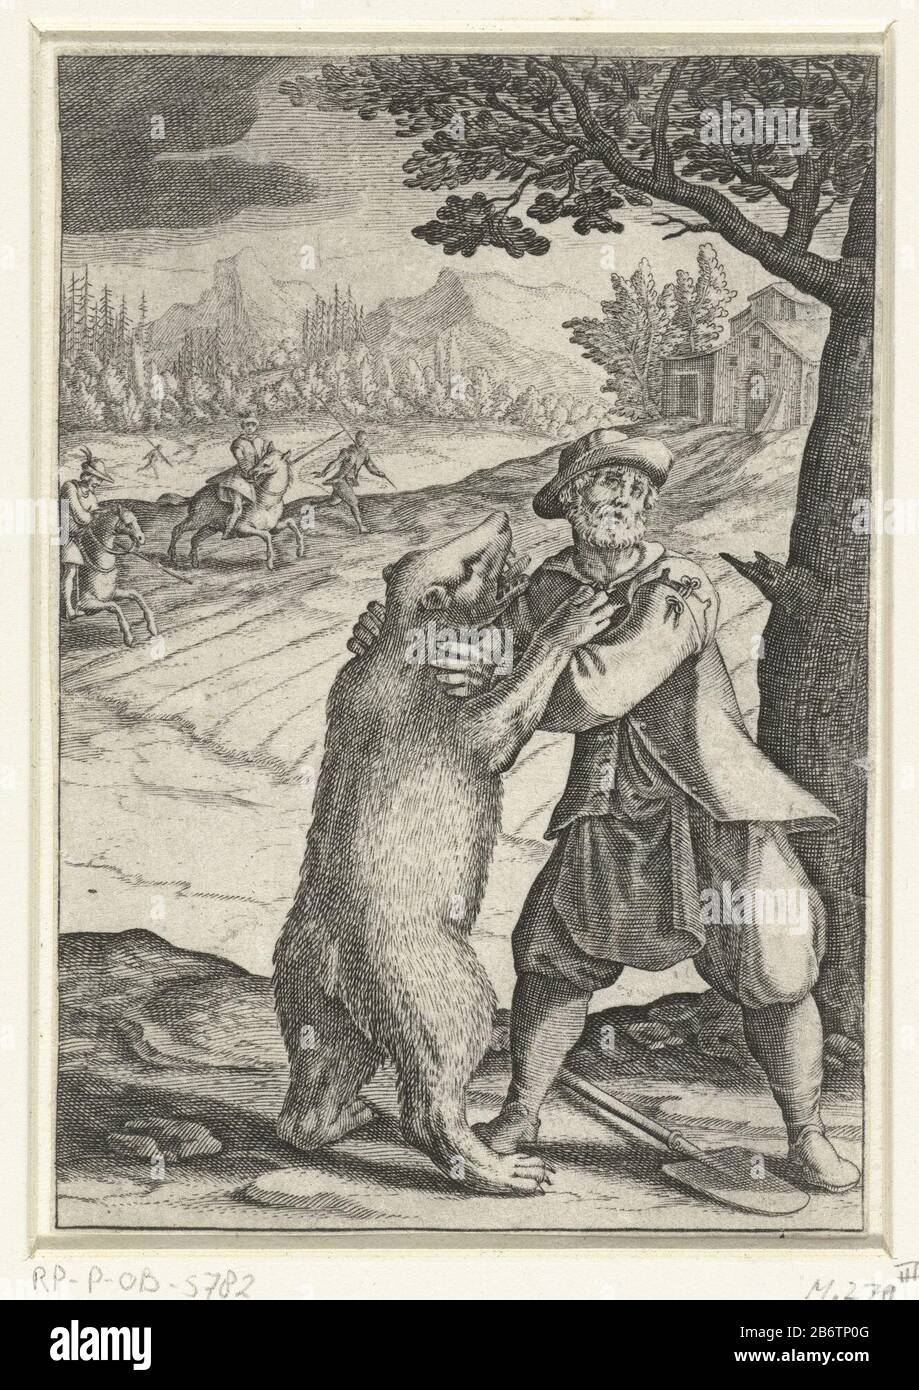 Het wonder van Spadino en de beer a man fights with a bear. In the background, two horsemen and two pedestrians in a mountain landscape near a huisje. Manufacturer : printmaker Jacques CallotPlaats manufacture: Florence Date: 1614 Physical features: car material: paper Technique: engra (printing process) Dimensions: sheet: h (cut off part of margin) 118 mm b × 81 mmToelichtingGebruikt as illustration in: Gio. Angiolo Lottini, 'Scelta d'alcuni miracoli e grazie della Santissima nunziata di Firenze '(a book about miracles done by Our Lady of the Annunicatie Florence, three editions in Florence, Stock Photo